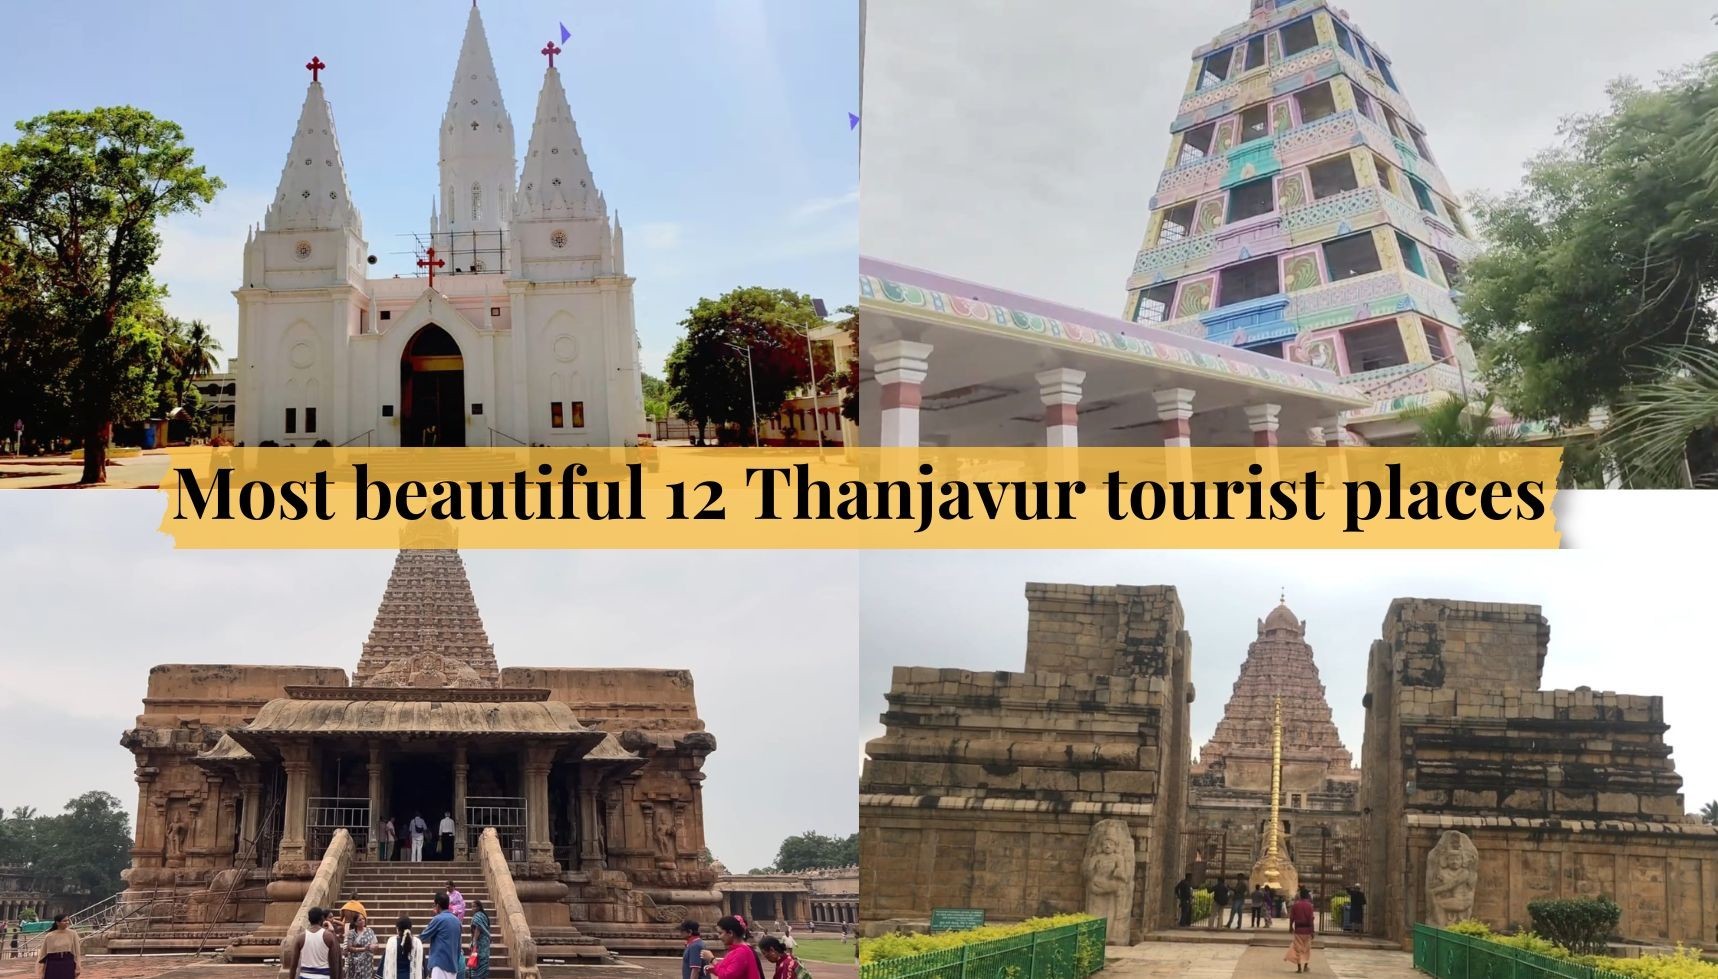 Discover the Most Beautiful 12 Thanjavur Tourist Places